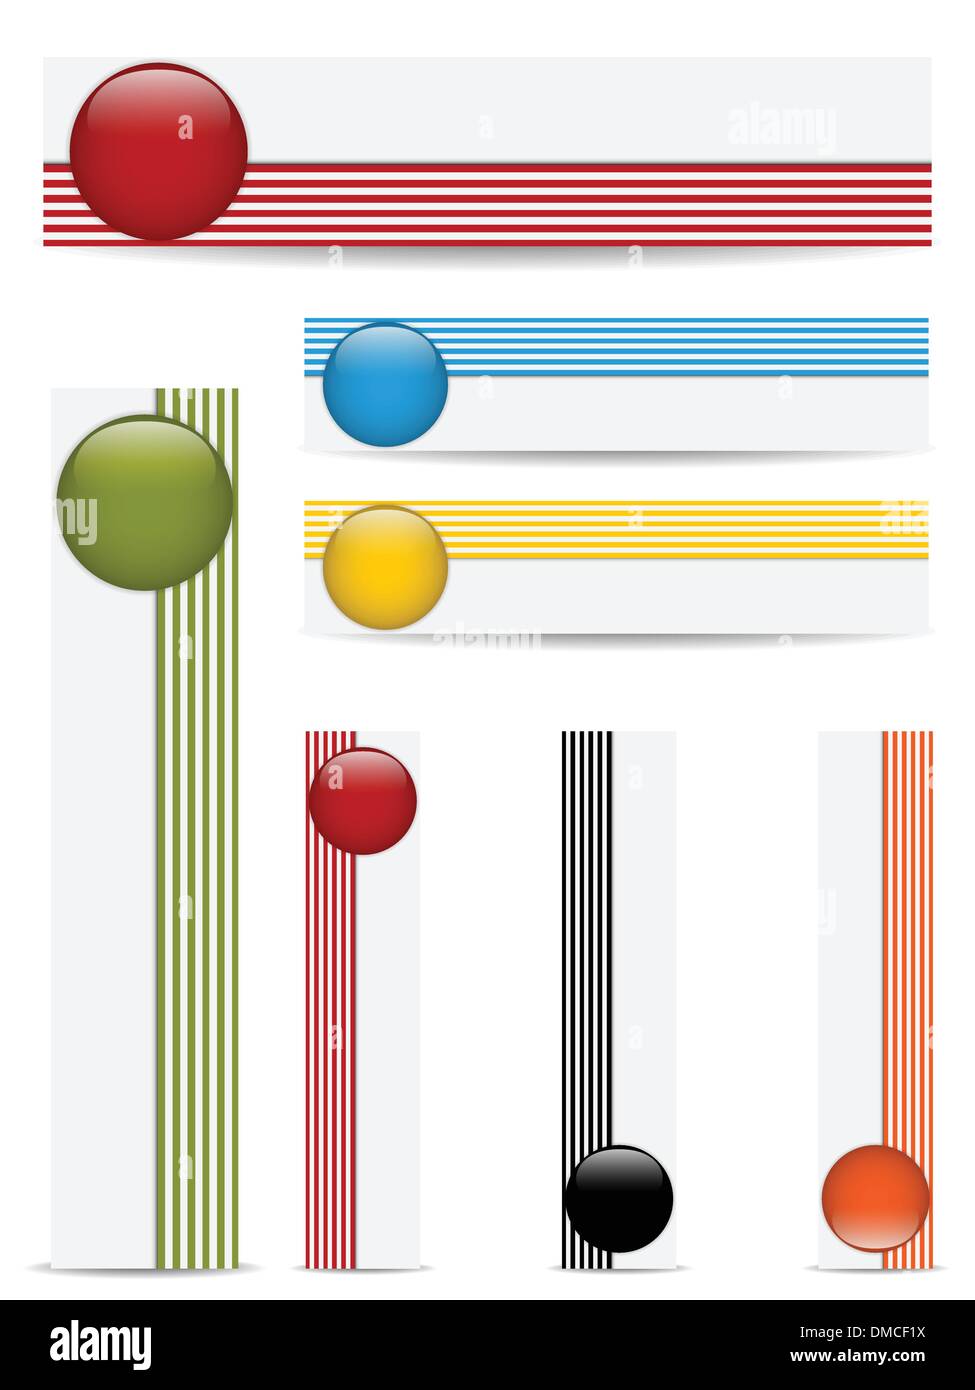 Glossy web buttons with colored bars. Stock Vector